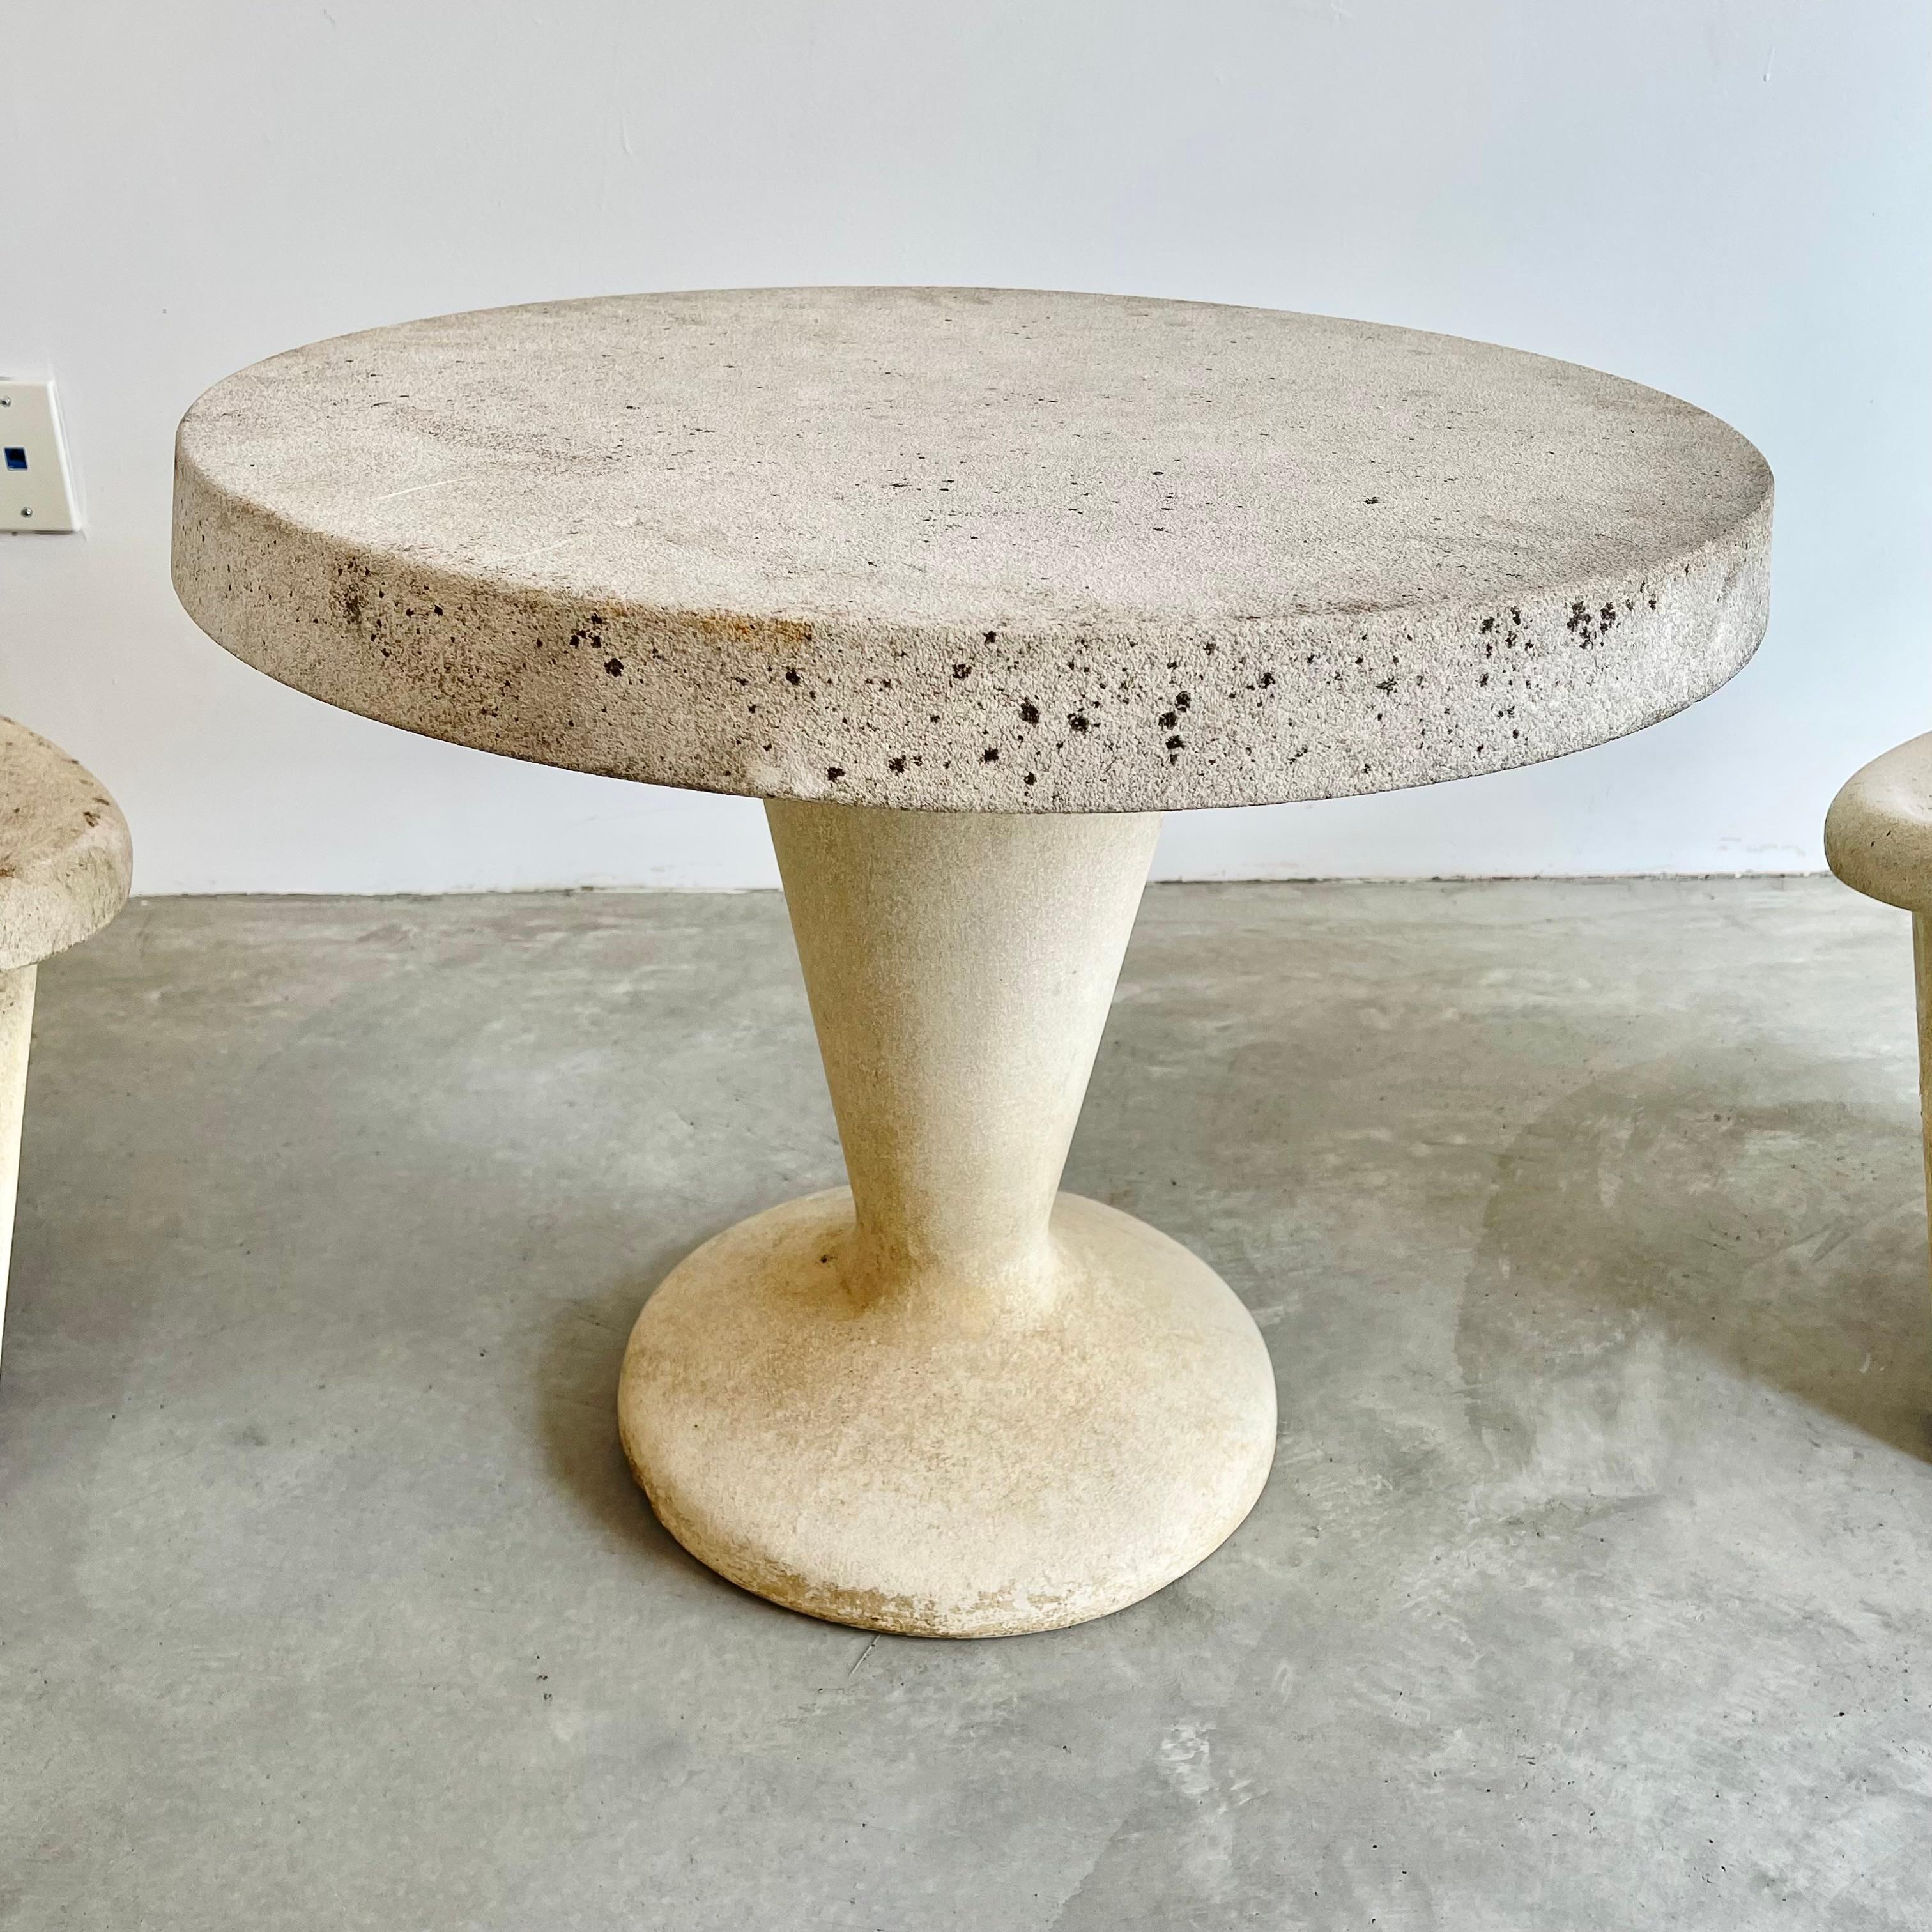 Sculptural Concrete Chairs and Table, 1960s Switzerland 3